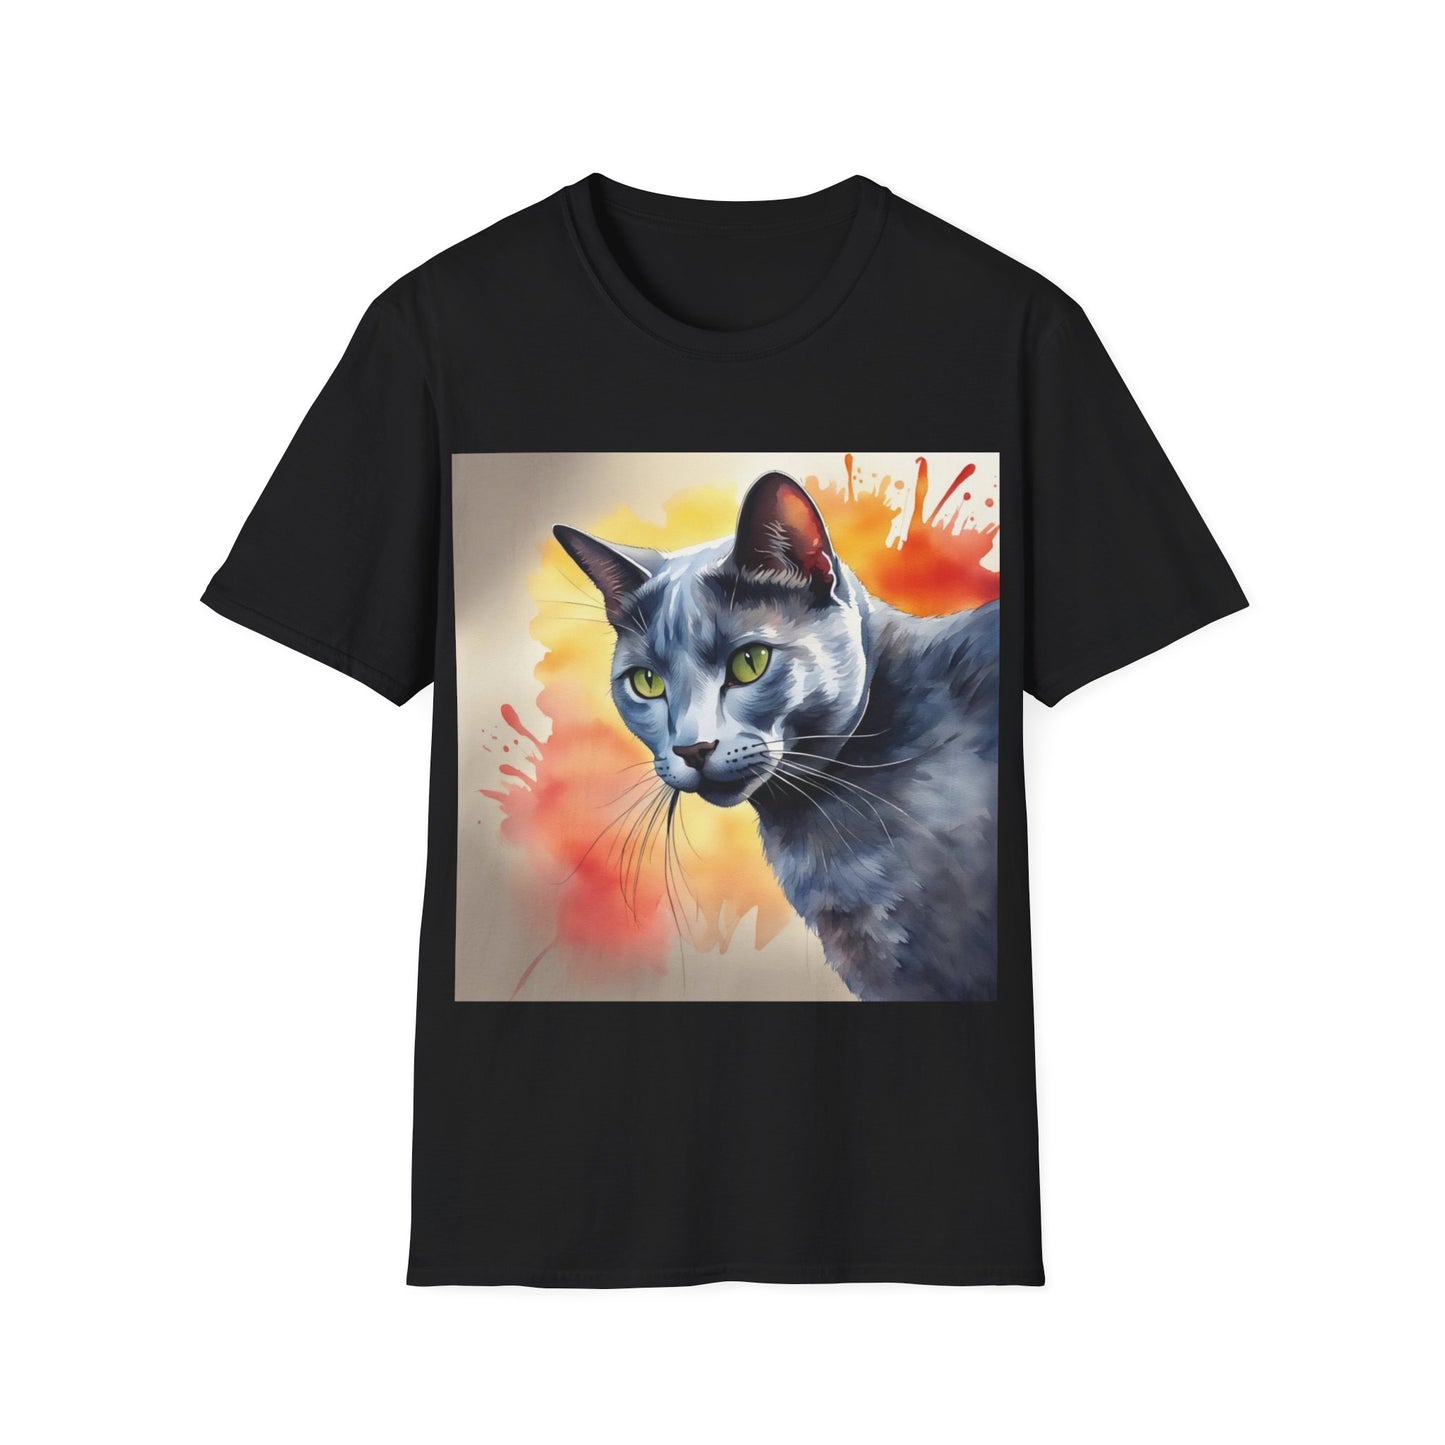 A black t-shirt with a watercolour painting of a Russian Blue cat